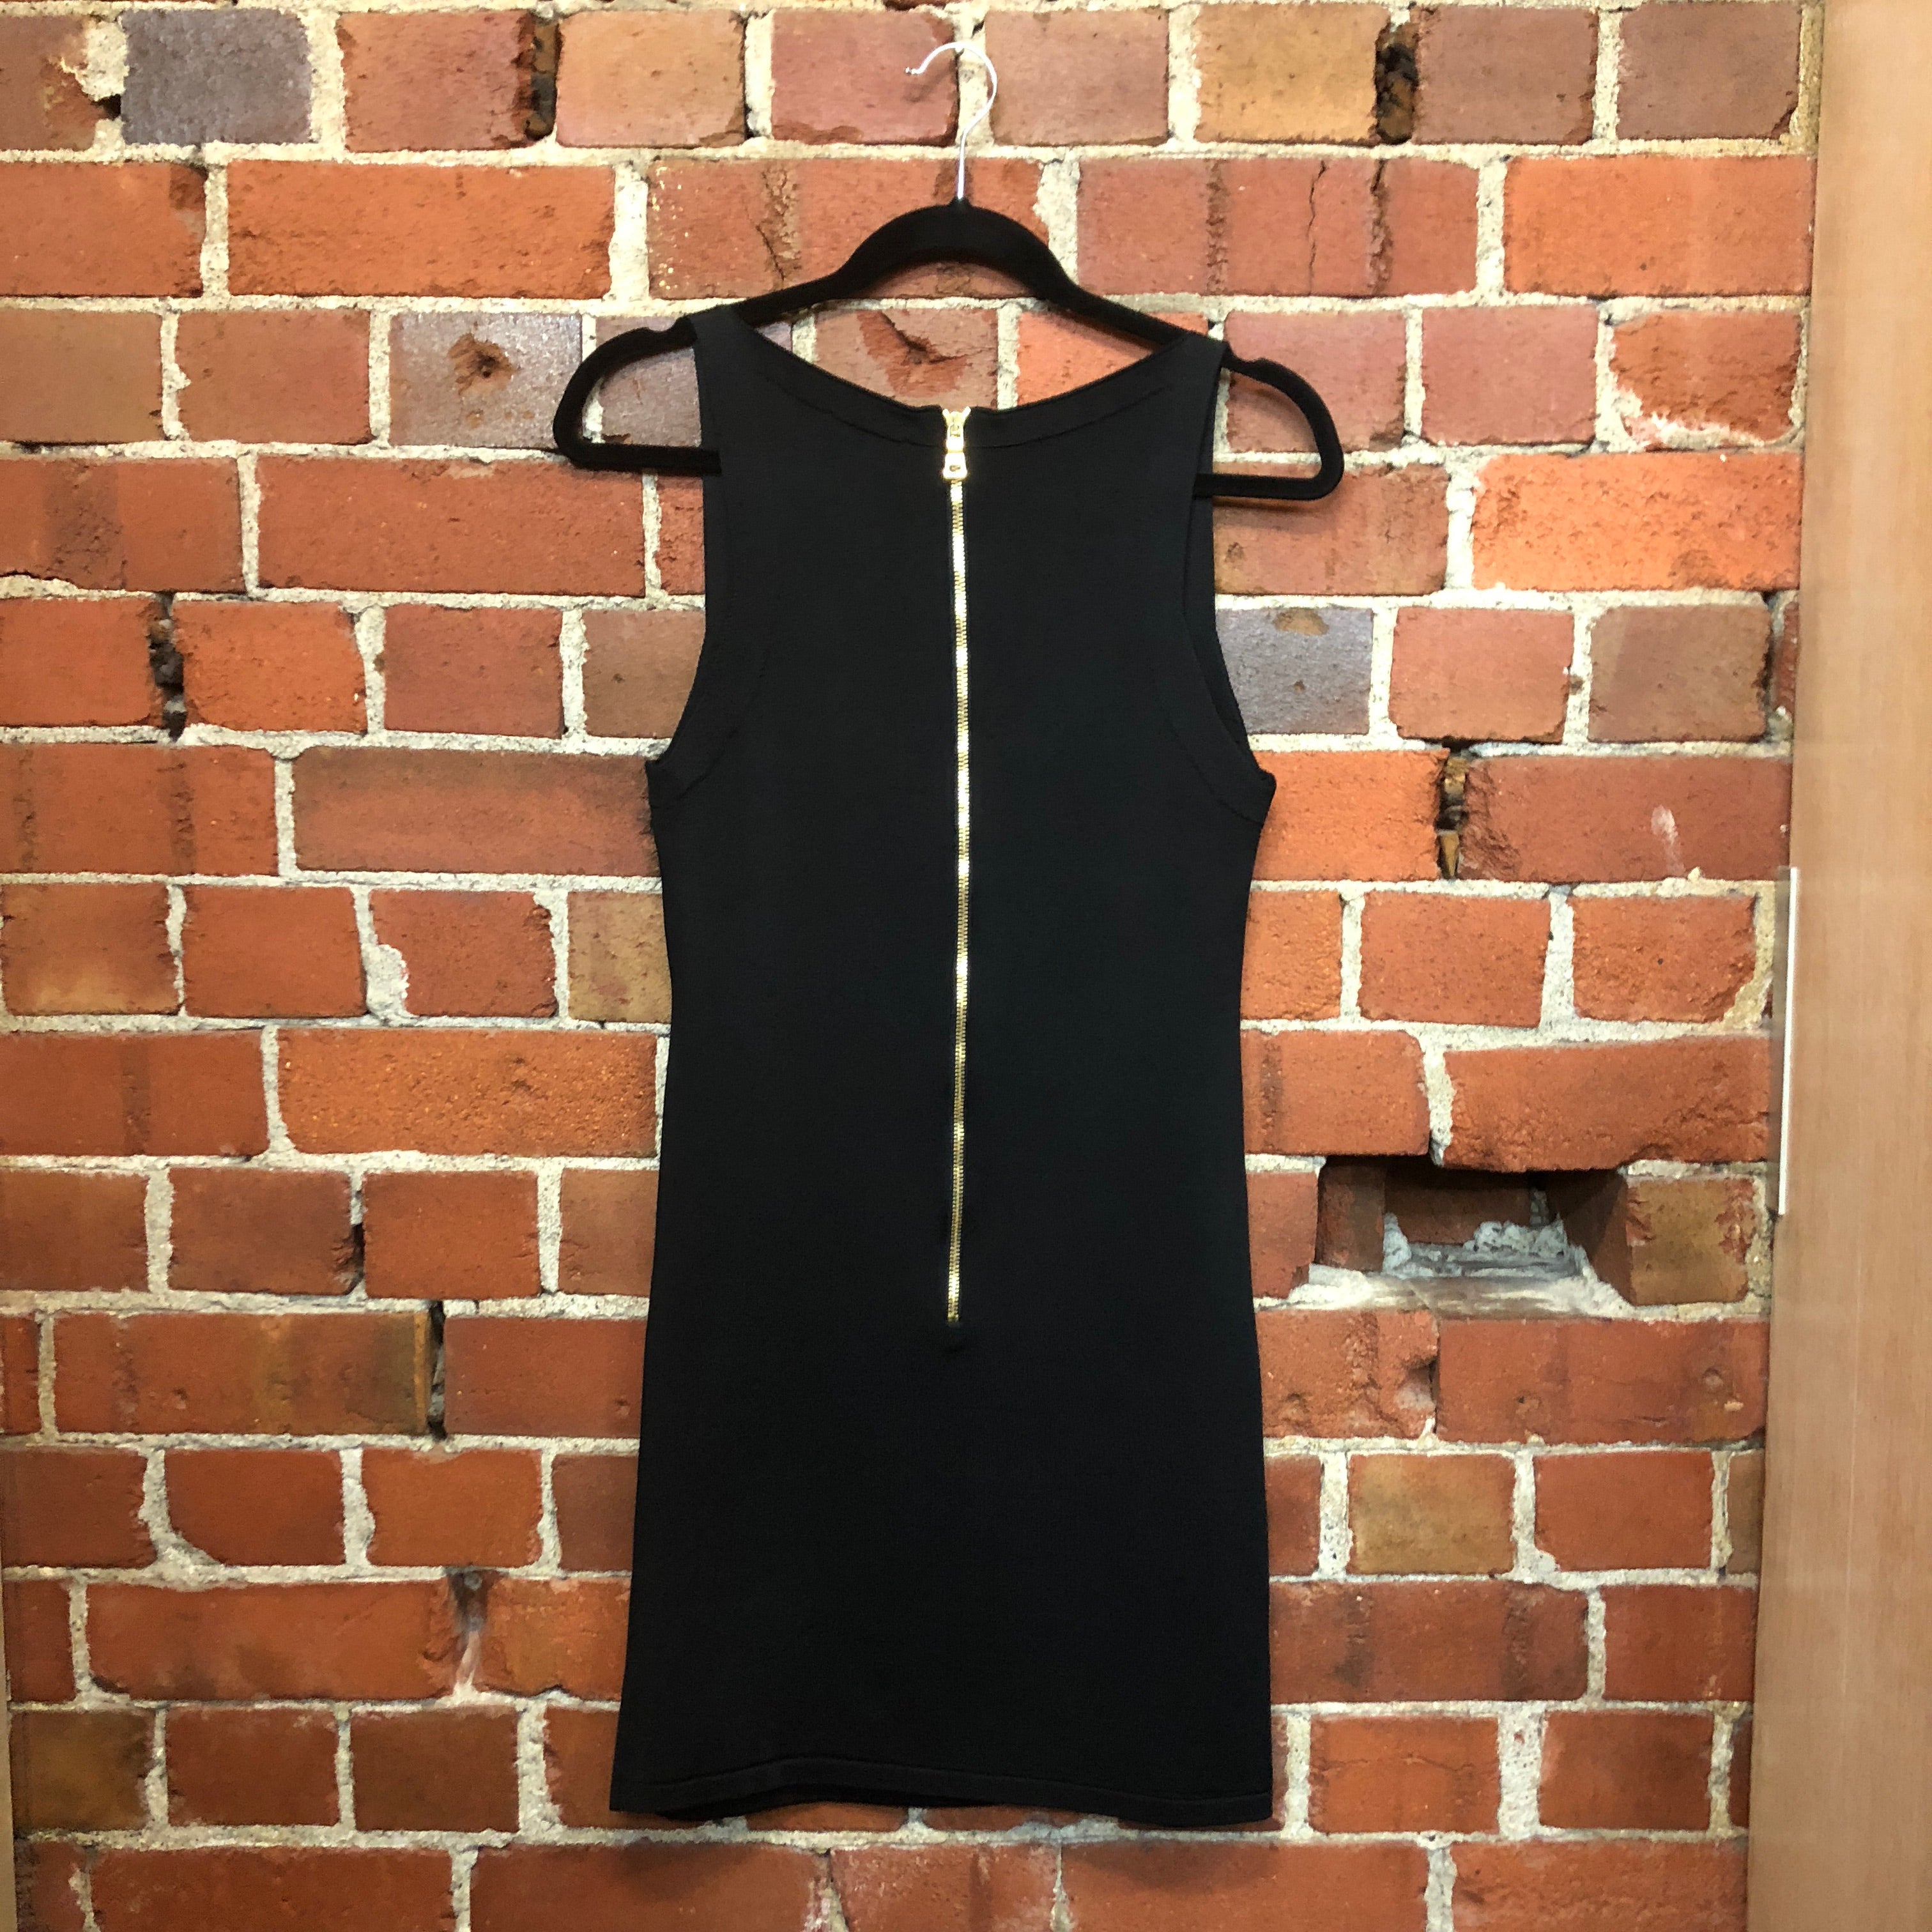 BALMAIN sexy LBD body con dress with lace up front